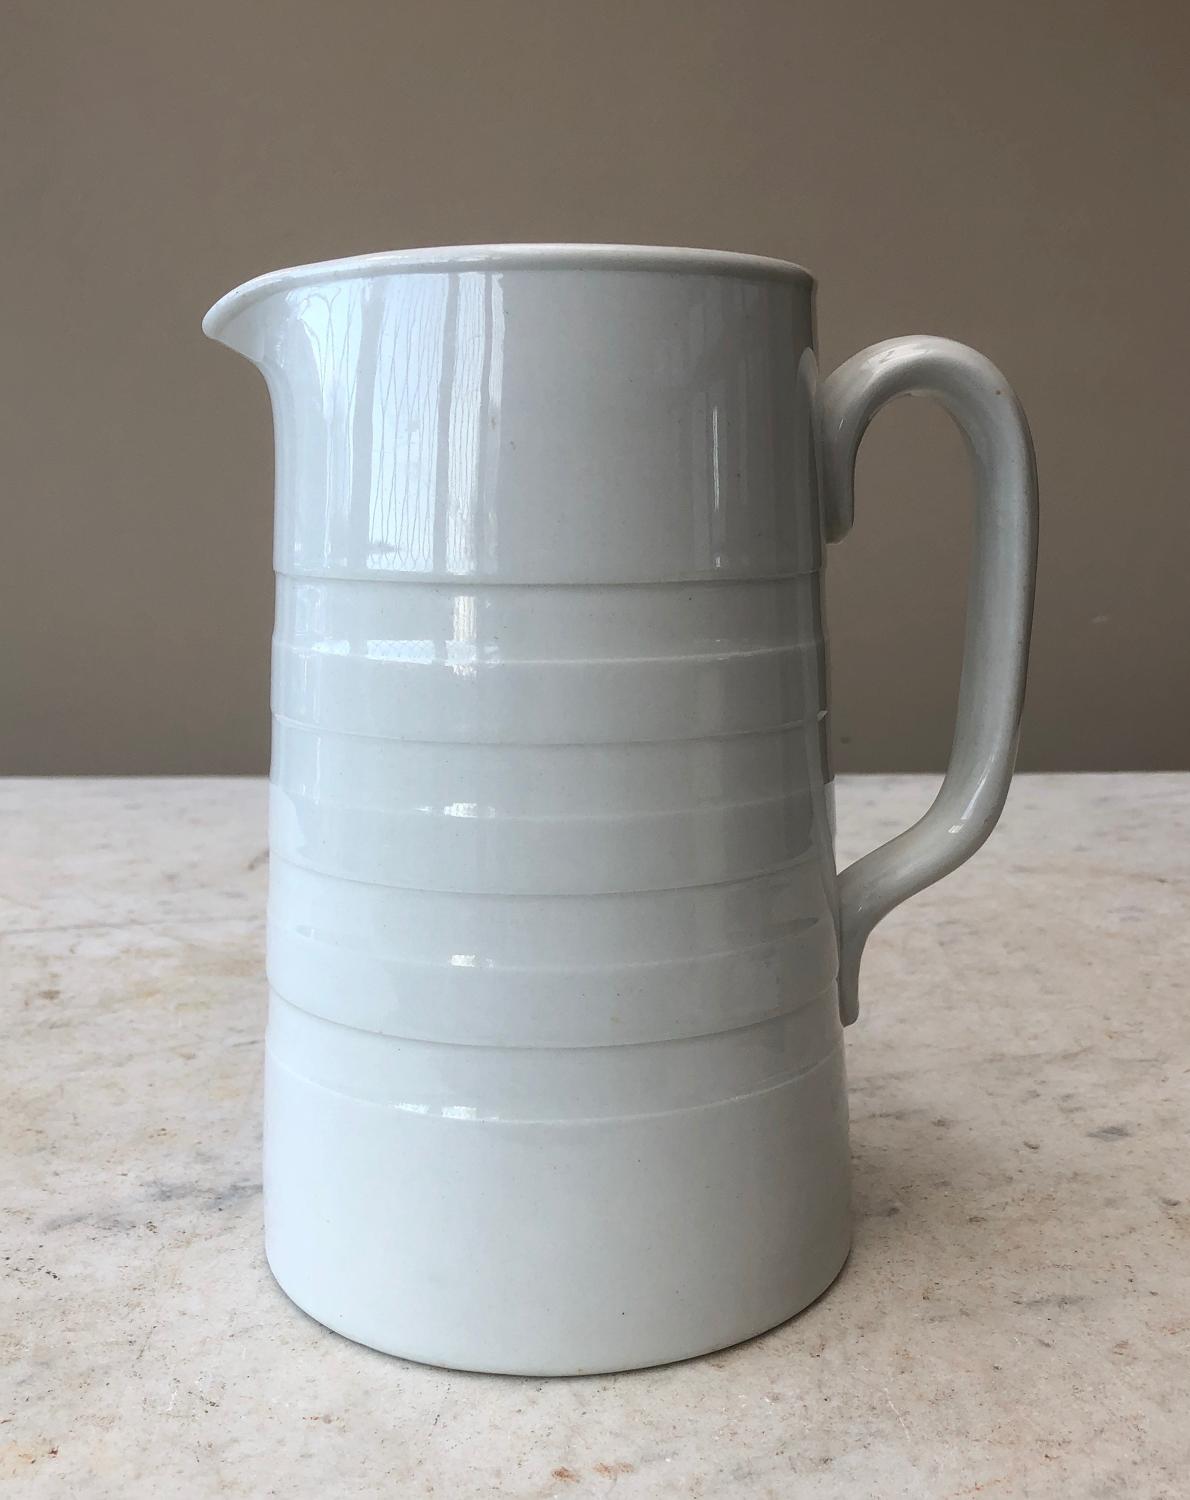 Edwardian White Banded 2 Pint Dairy Cream Jug in Mint Condition